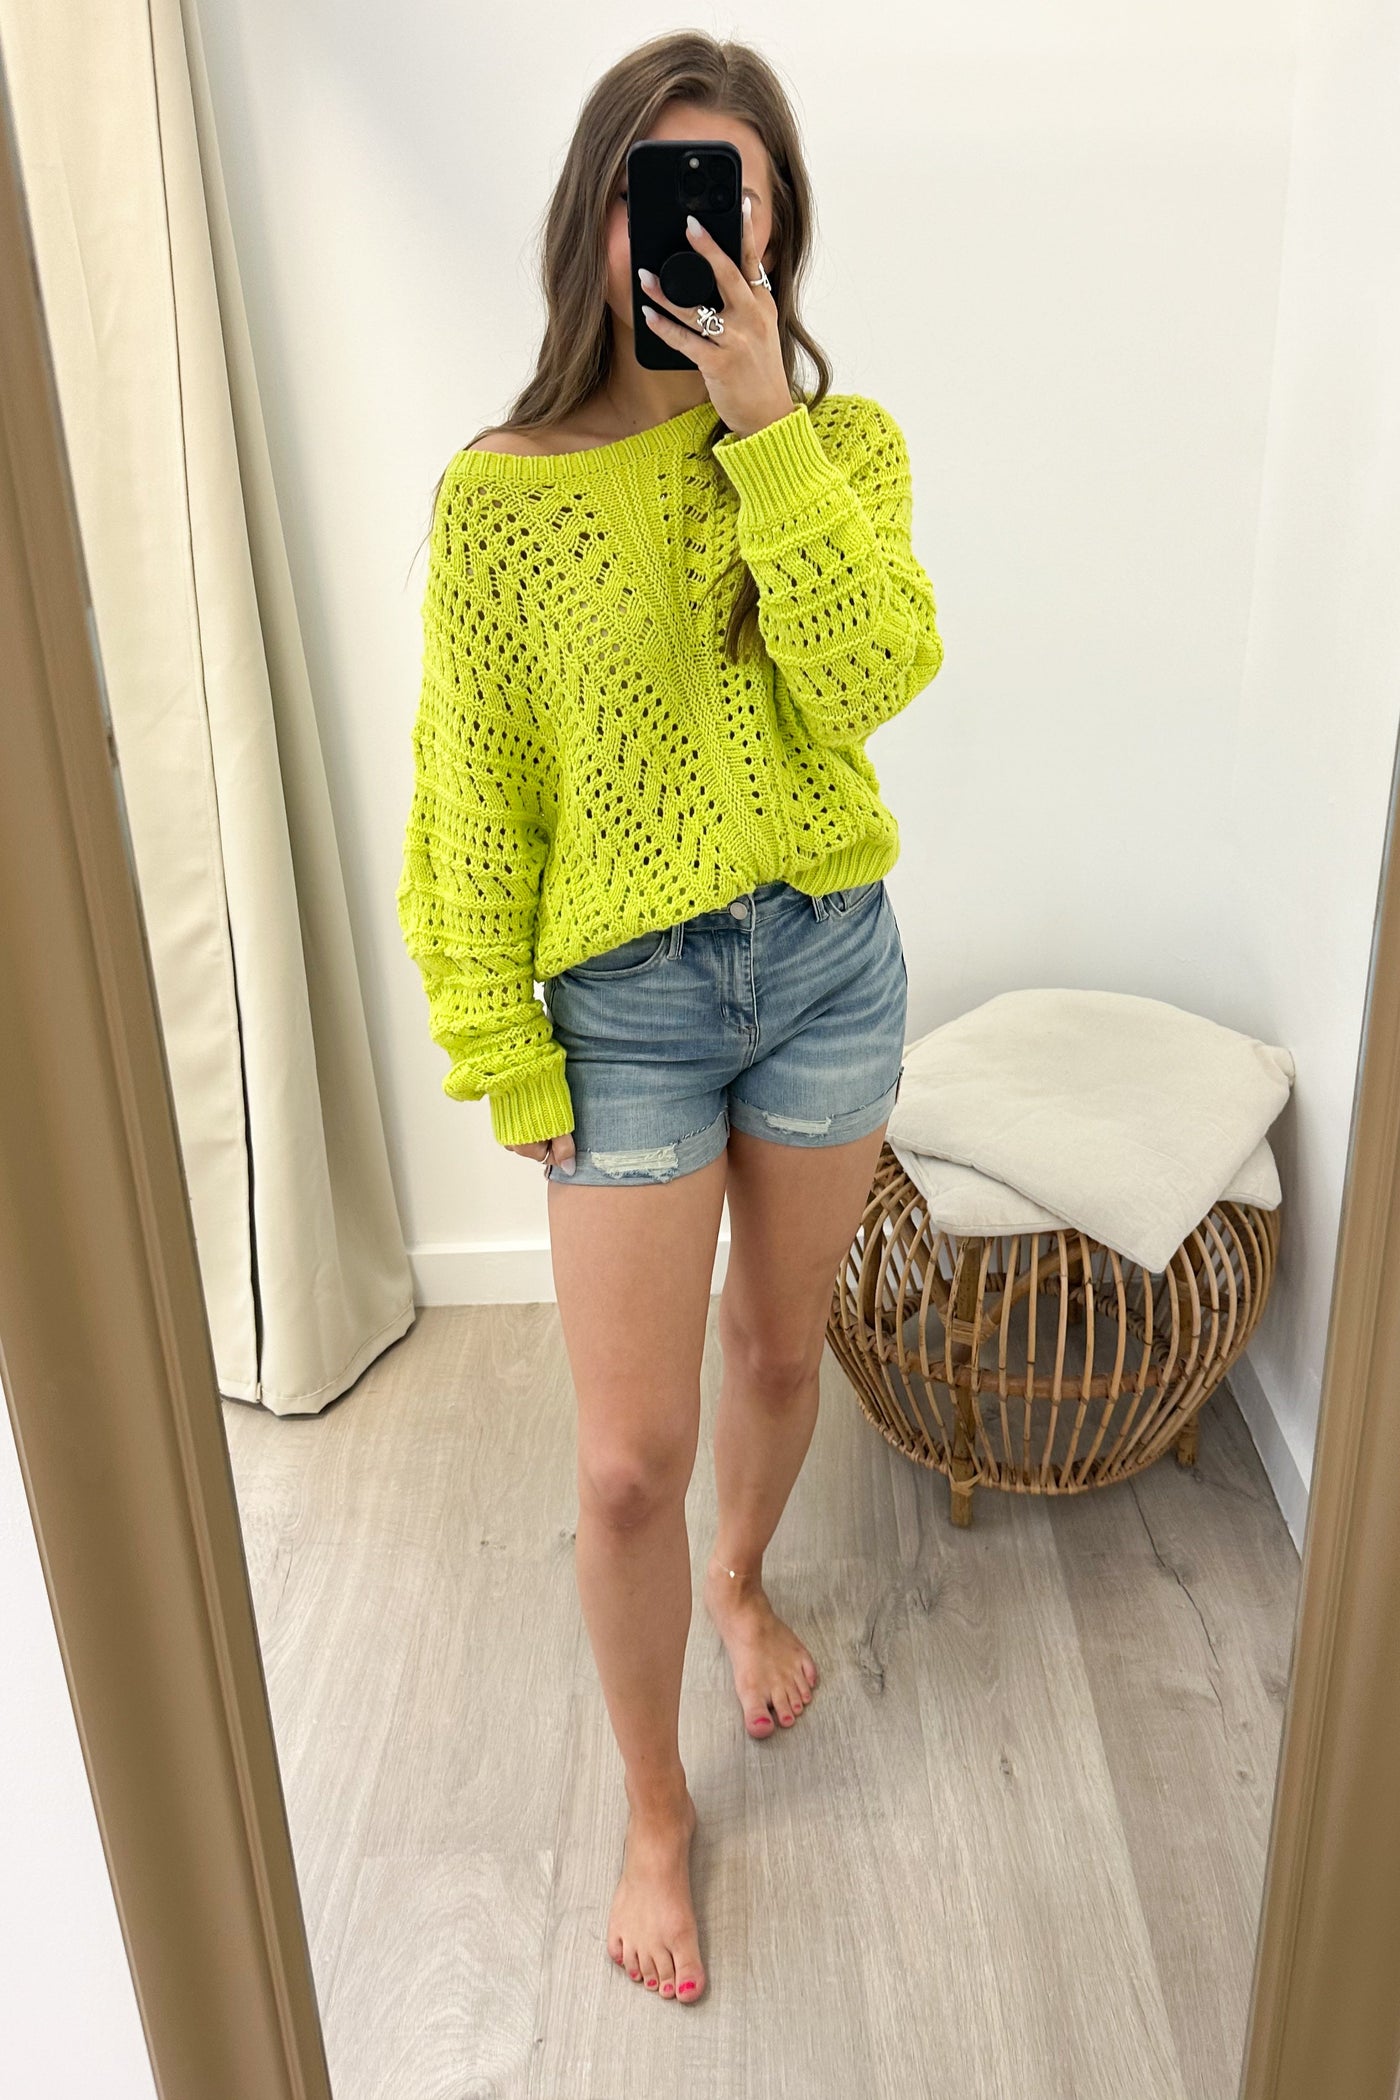 "Best Of Me" Sweater (Lime Yellow) - Happily Ever Aften